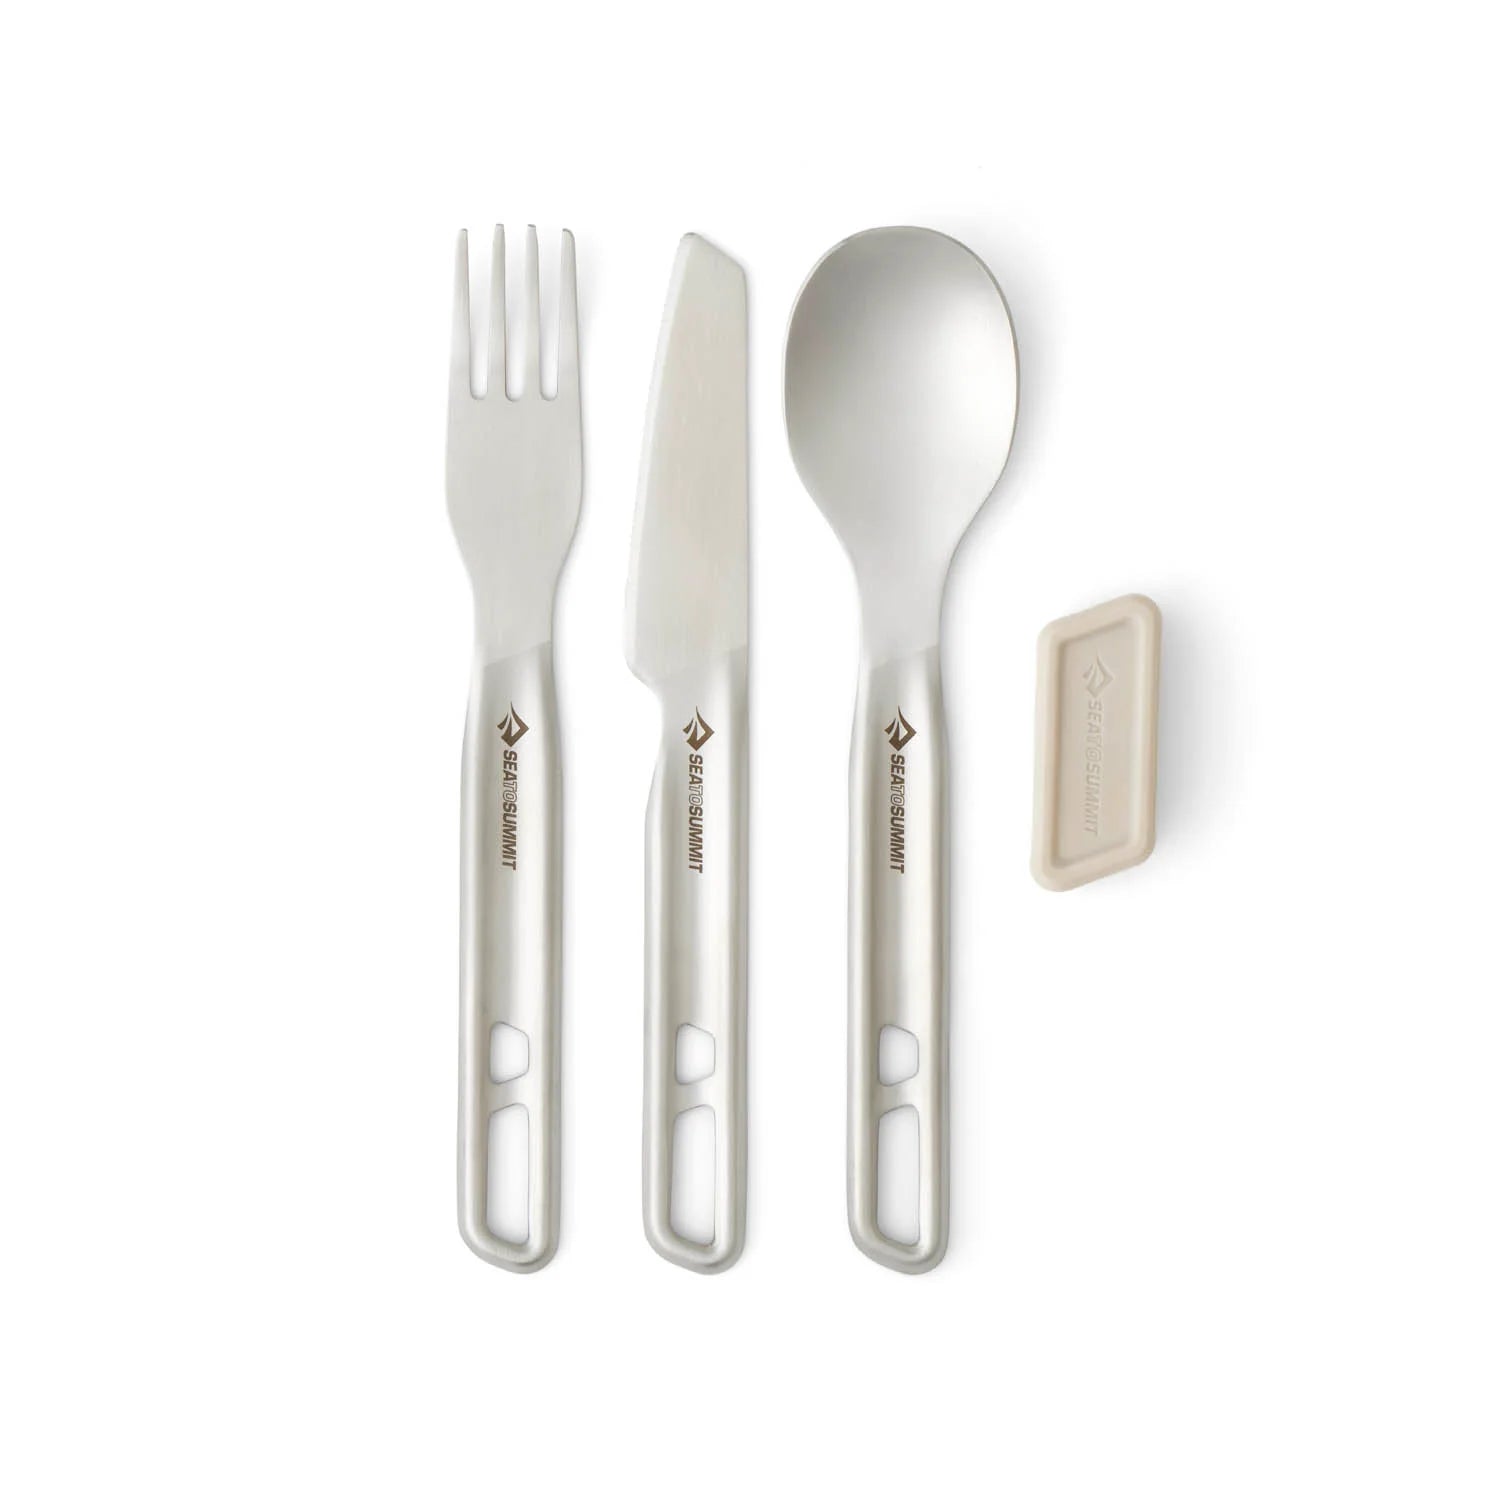 Sea to Summit Detour Stainless Steel Cutlery Set - 3 Piece -  - Mansfield Hunting & Fishing - Products to prepare for Corona Virus